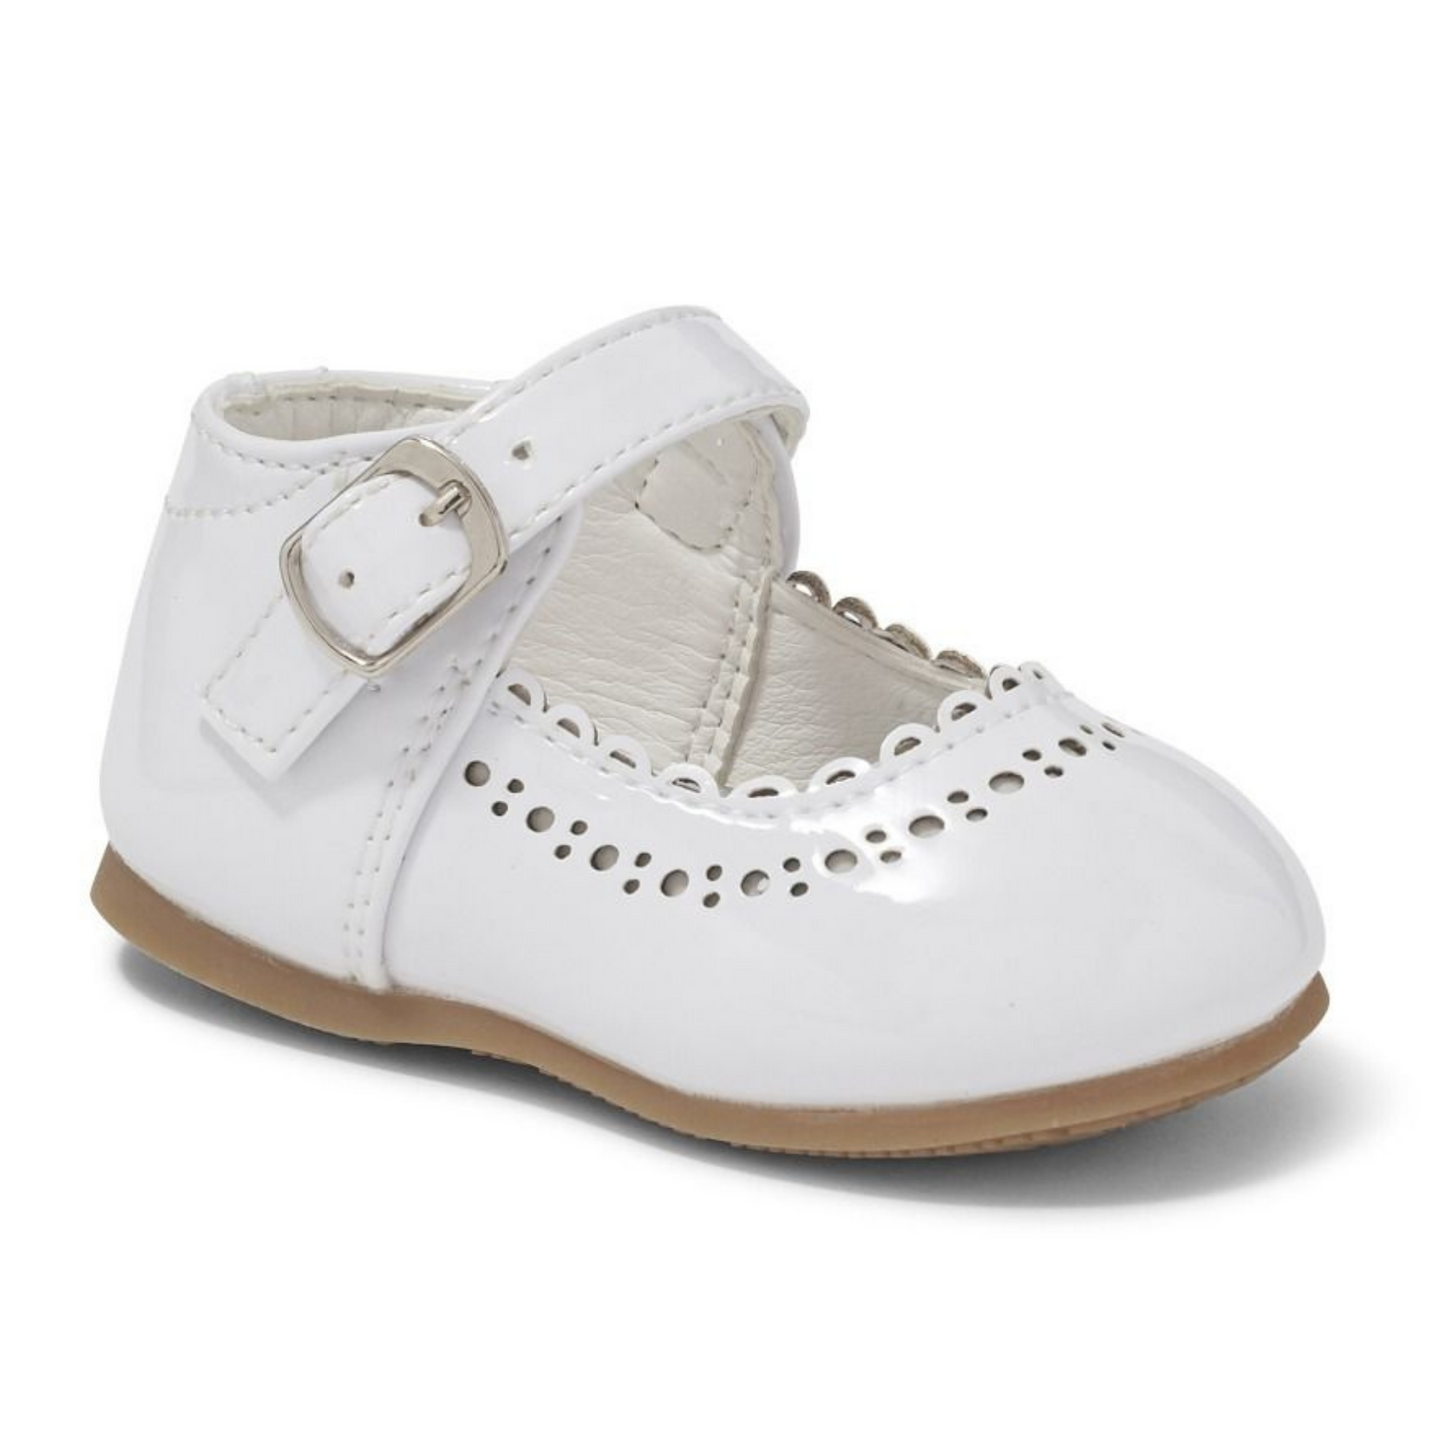 Debbie White Shoe With Buckle Fastening